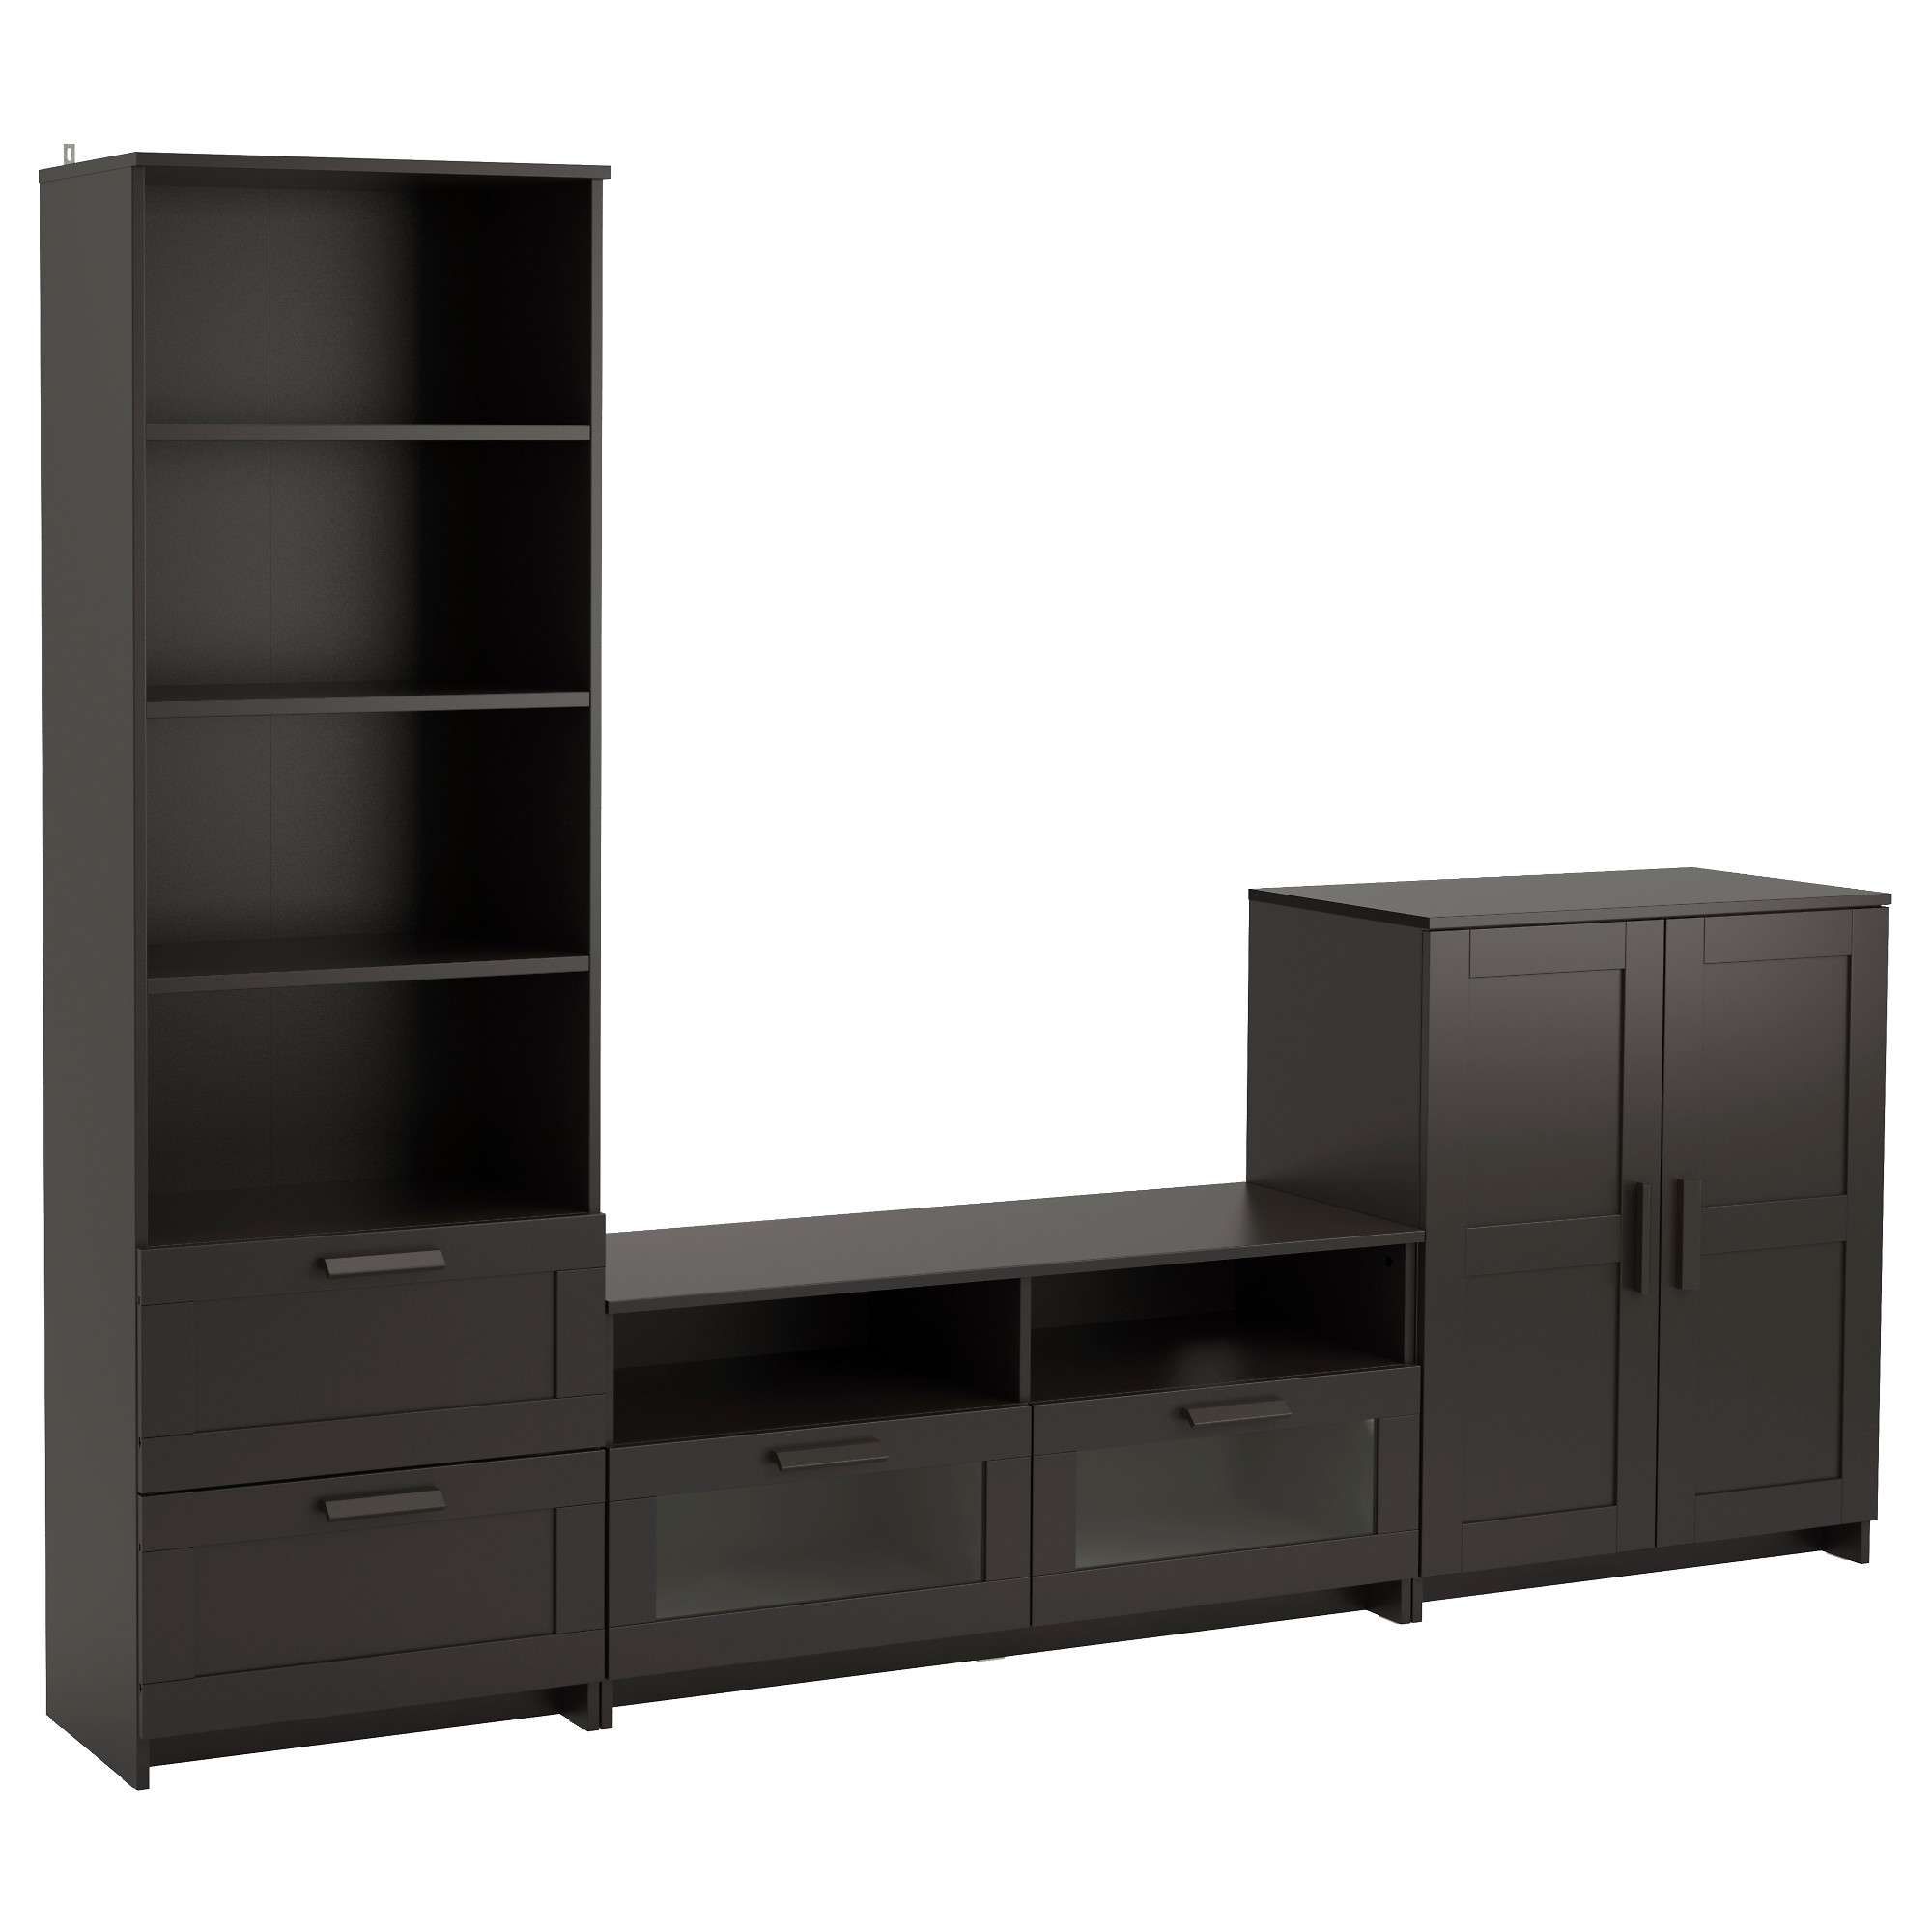 Tv Stands & Tv Units | Ikea Pertaining To 60 Cm High Tv Stands (View 8 of 15)